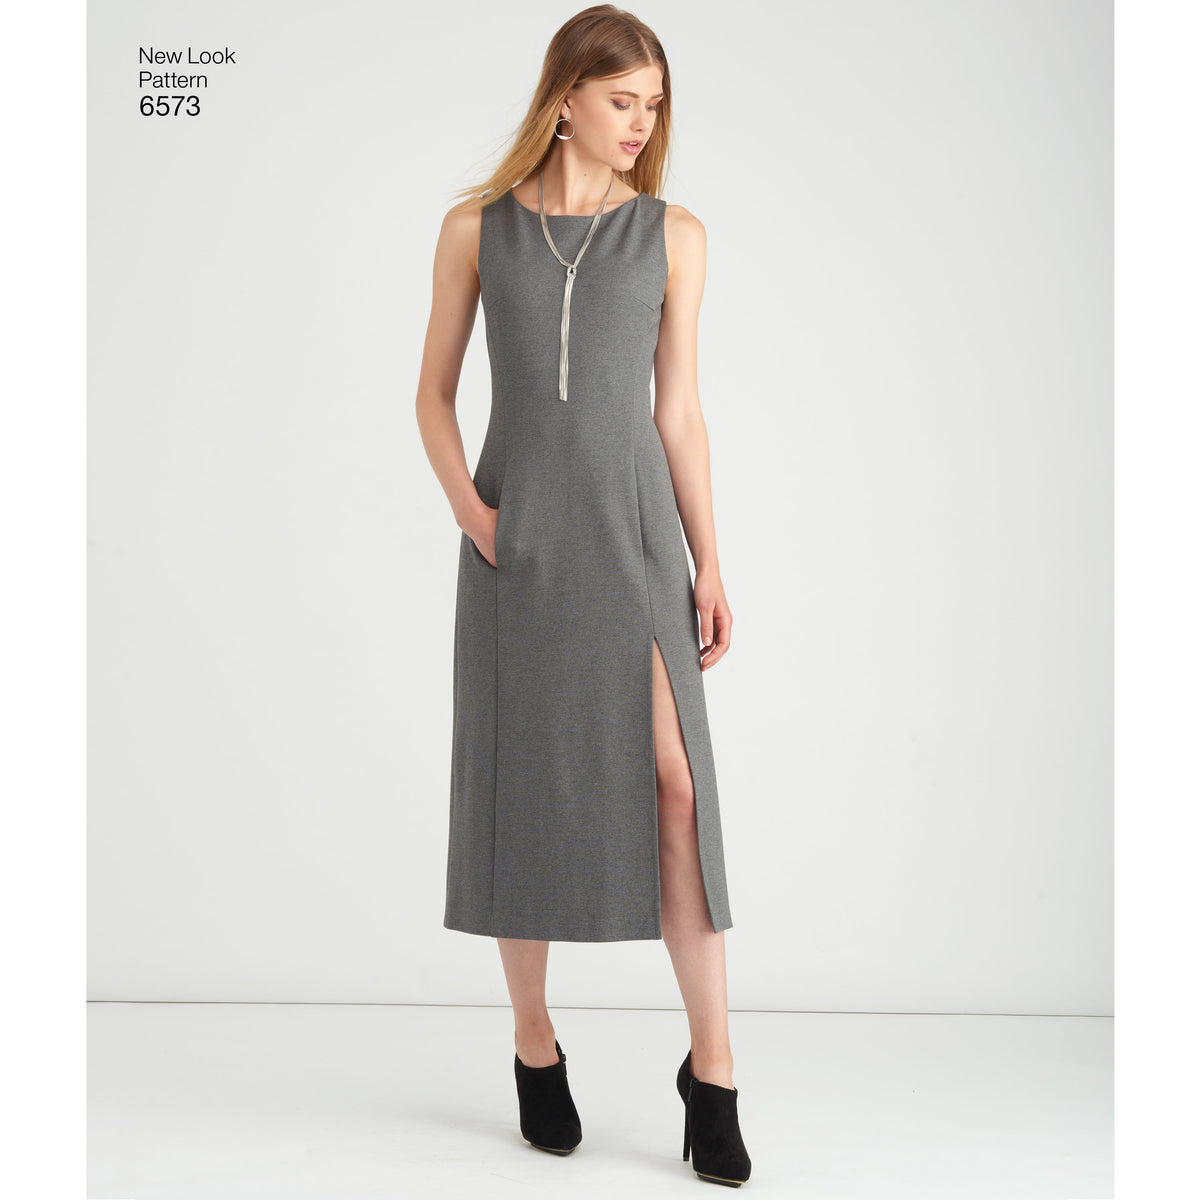 6573 New Look Pattern 6573 Misses' Dress and Wrap